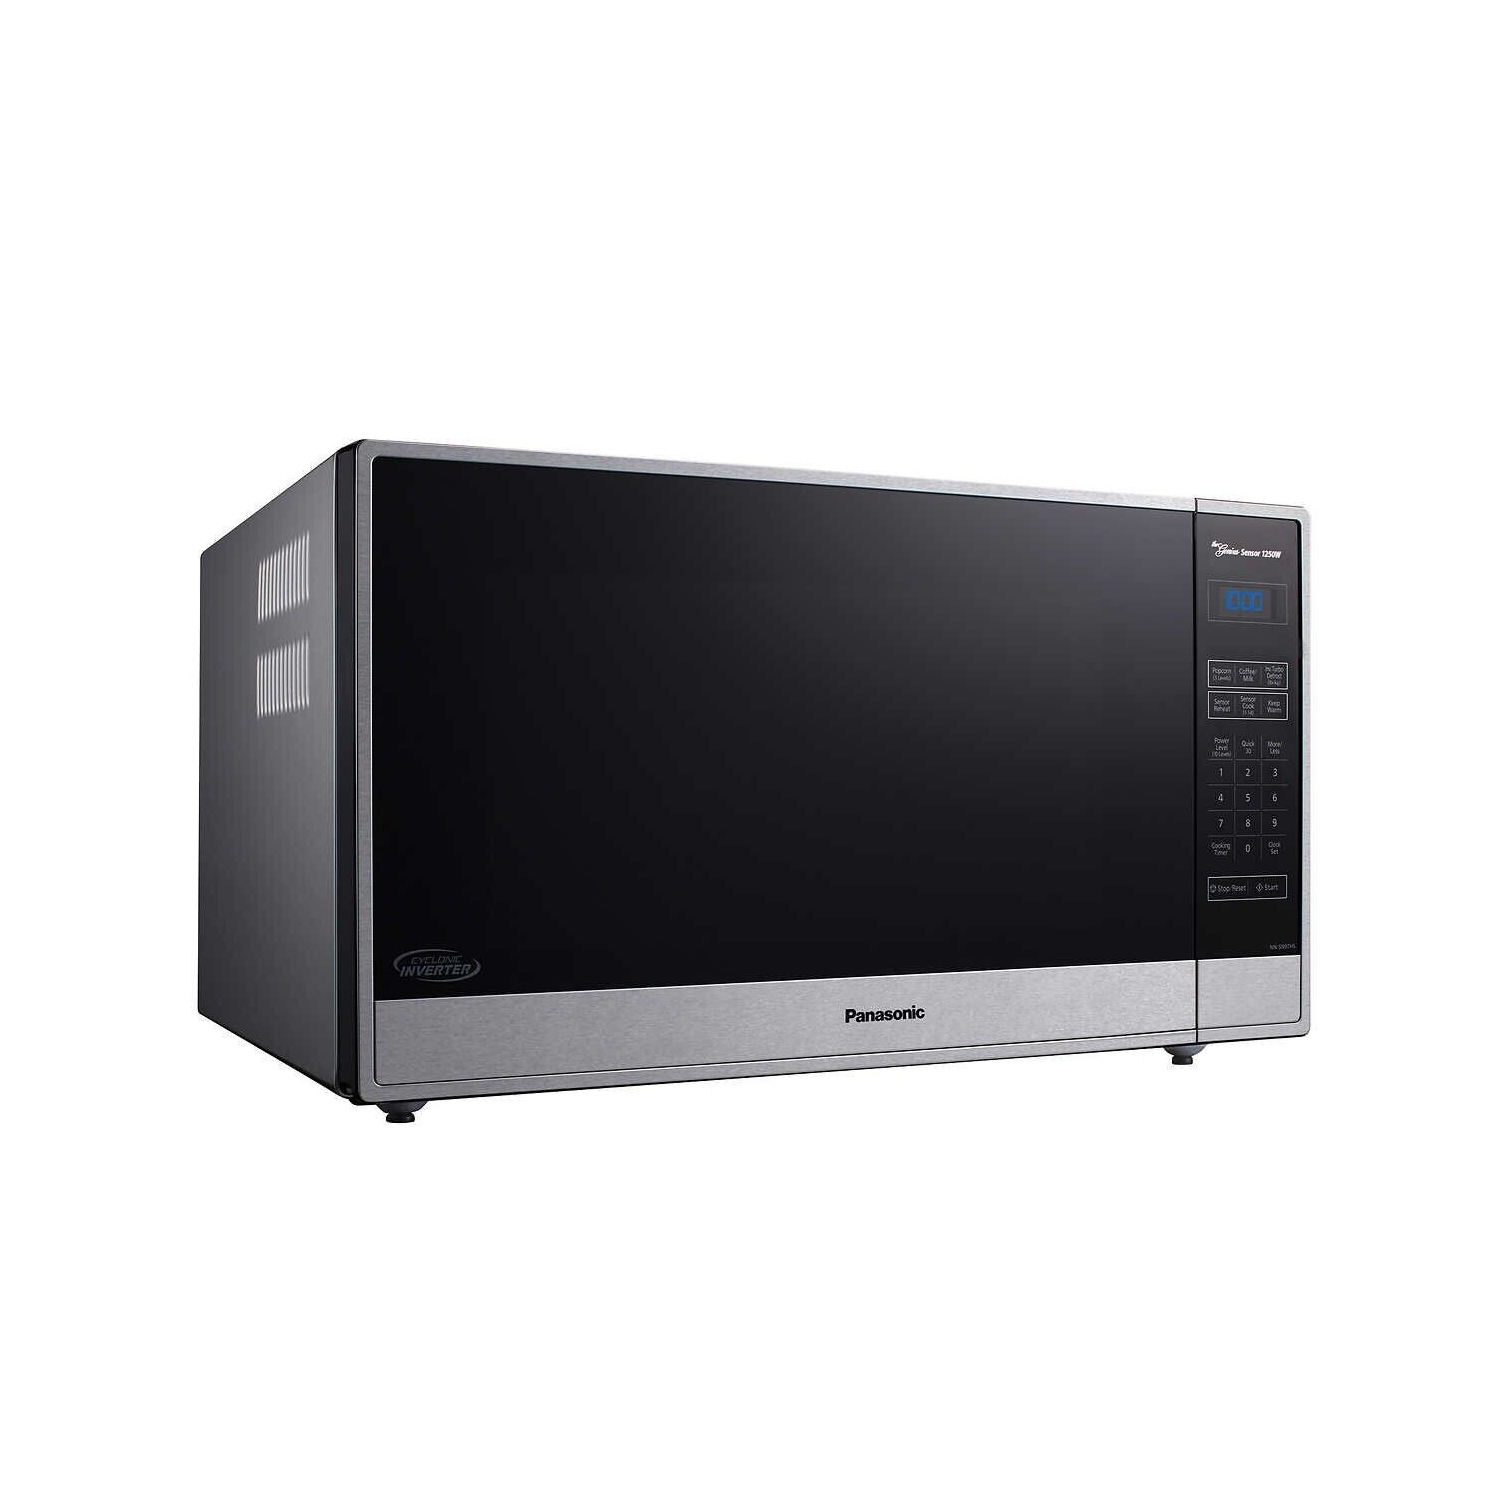 Panasonic Family Size 2.2CuFt Countertop Microwave Oven with Cyclonic Inverter (Refurbished) Good